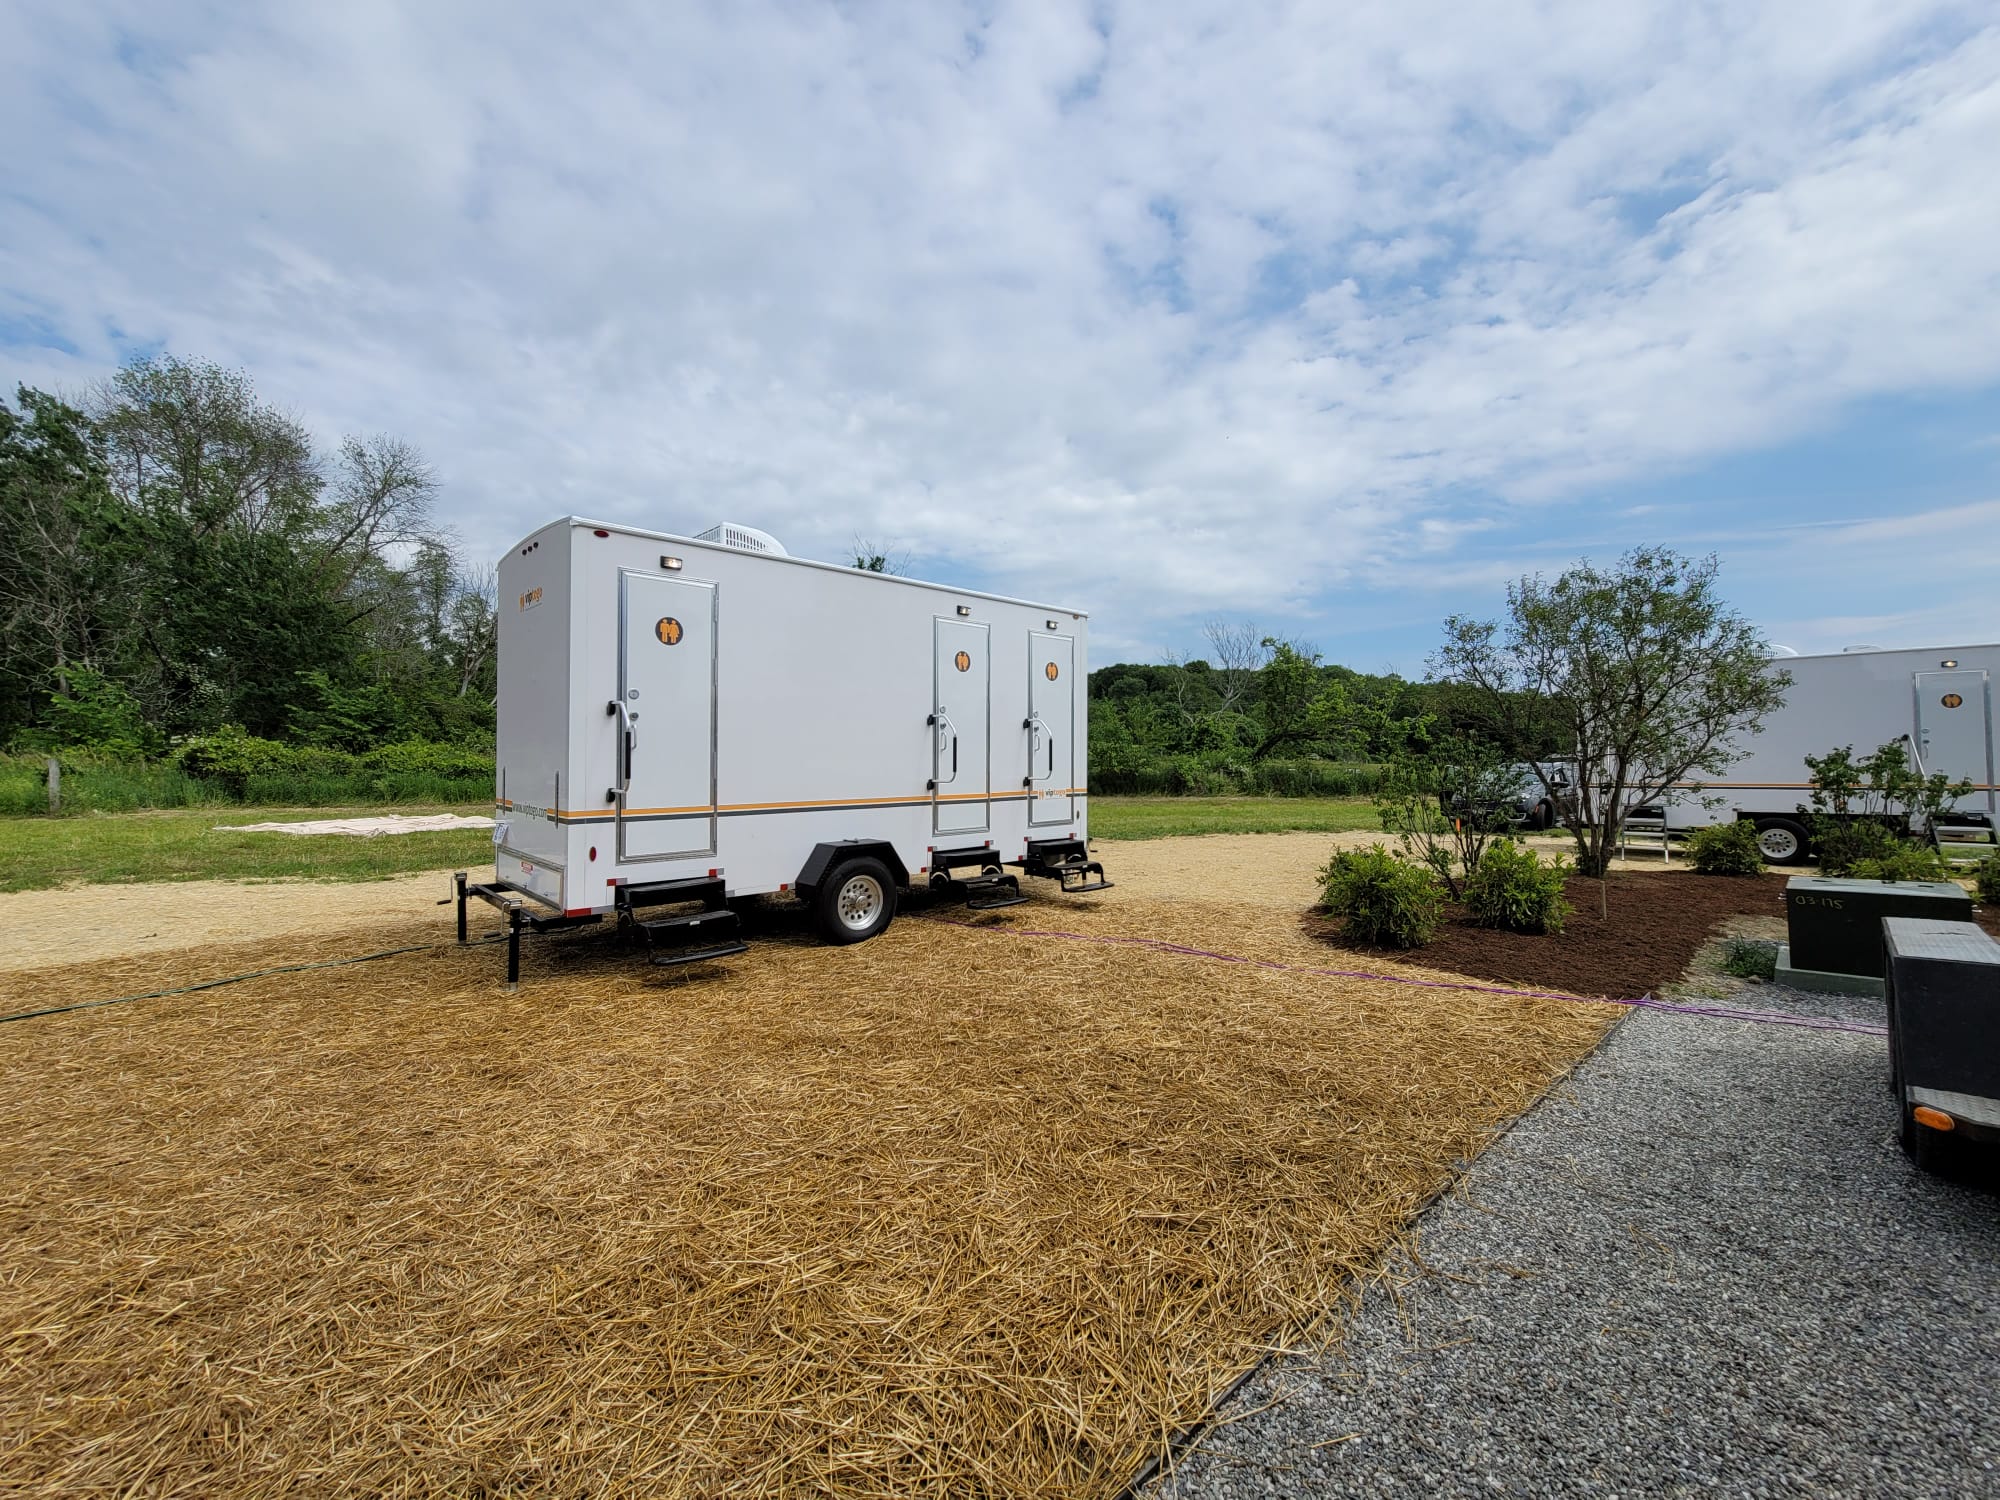 Three Station Restroom Trailer, at outdoor event